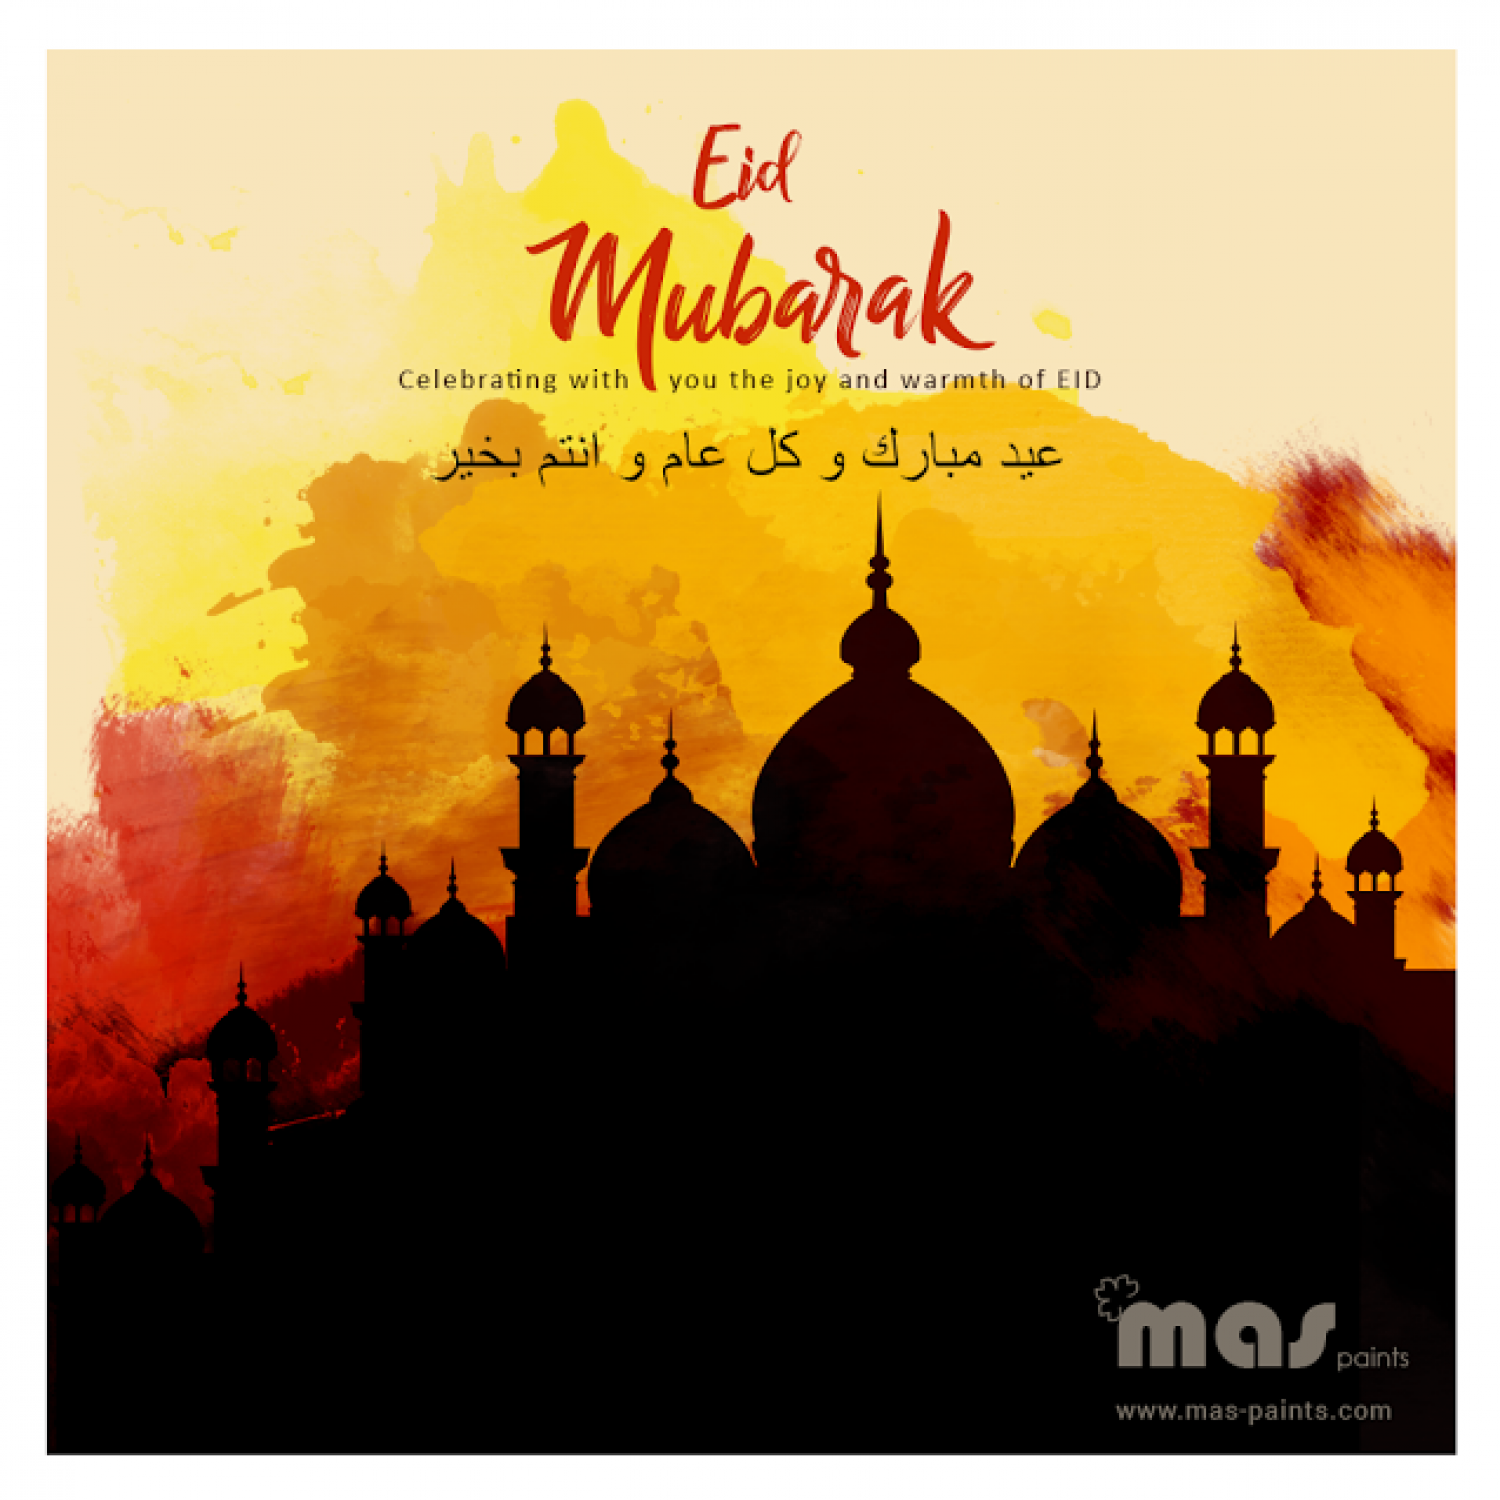 "Mas paints' Celebrating with you the joy and warmth of EID  Infographic